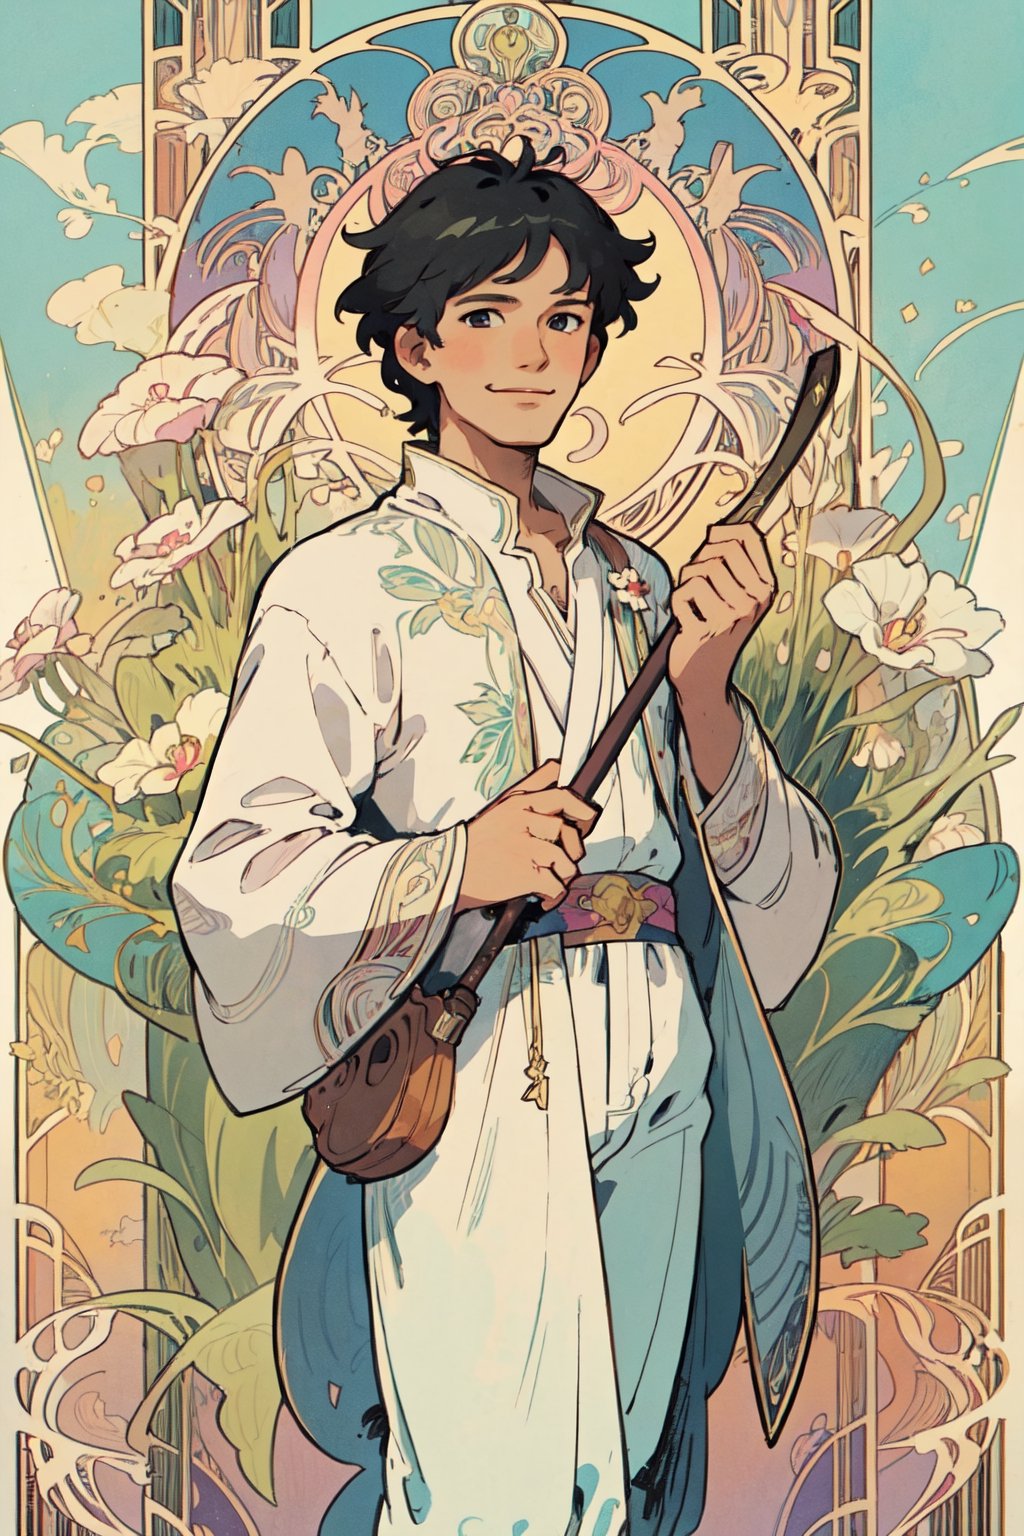 (masterpiece, best quality, highly detailed, ultra-detailed, intricate), illustration, pastel colors, art_nouveau, Art Nouveau by Alphonse Mucha, tarot, A young man, carrying a small bag and a cane in his hand, is smiling, A cute puppy 
 next to him,full of innocence, innocence and no fear. The Fool card represents a new beginning, new adventures and challenges, and a spirit of faith, courage, and optimism